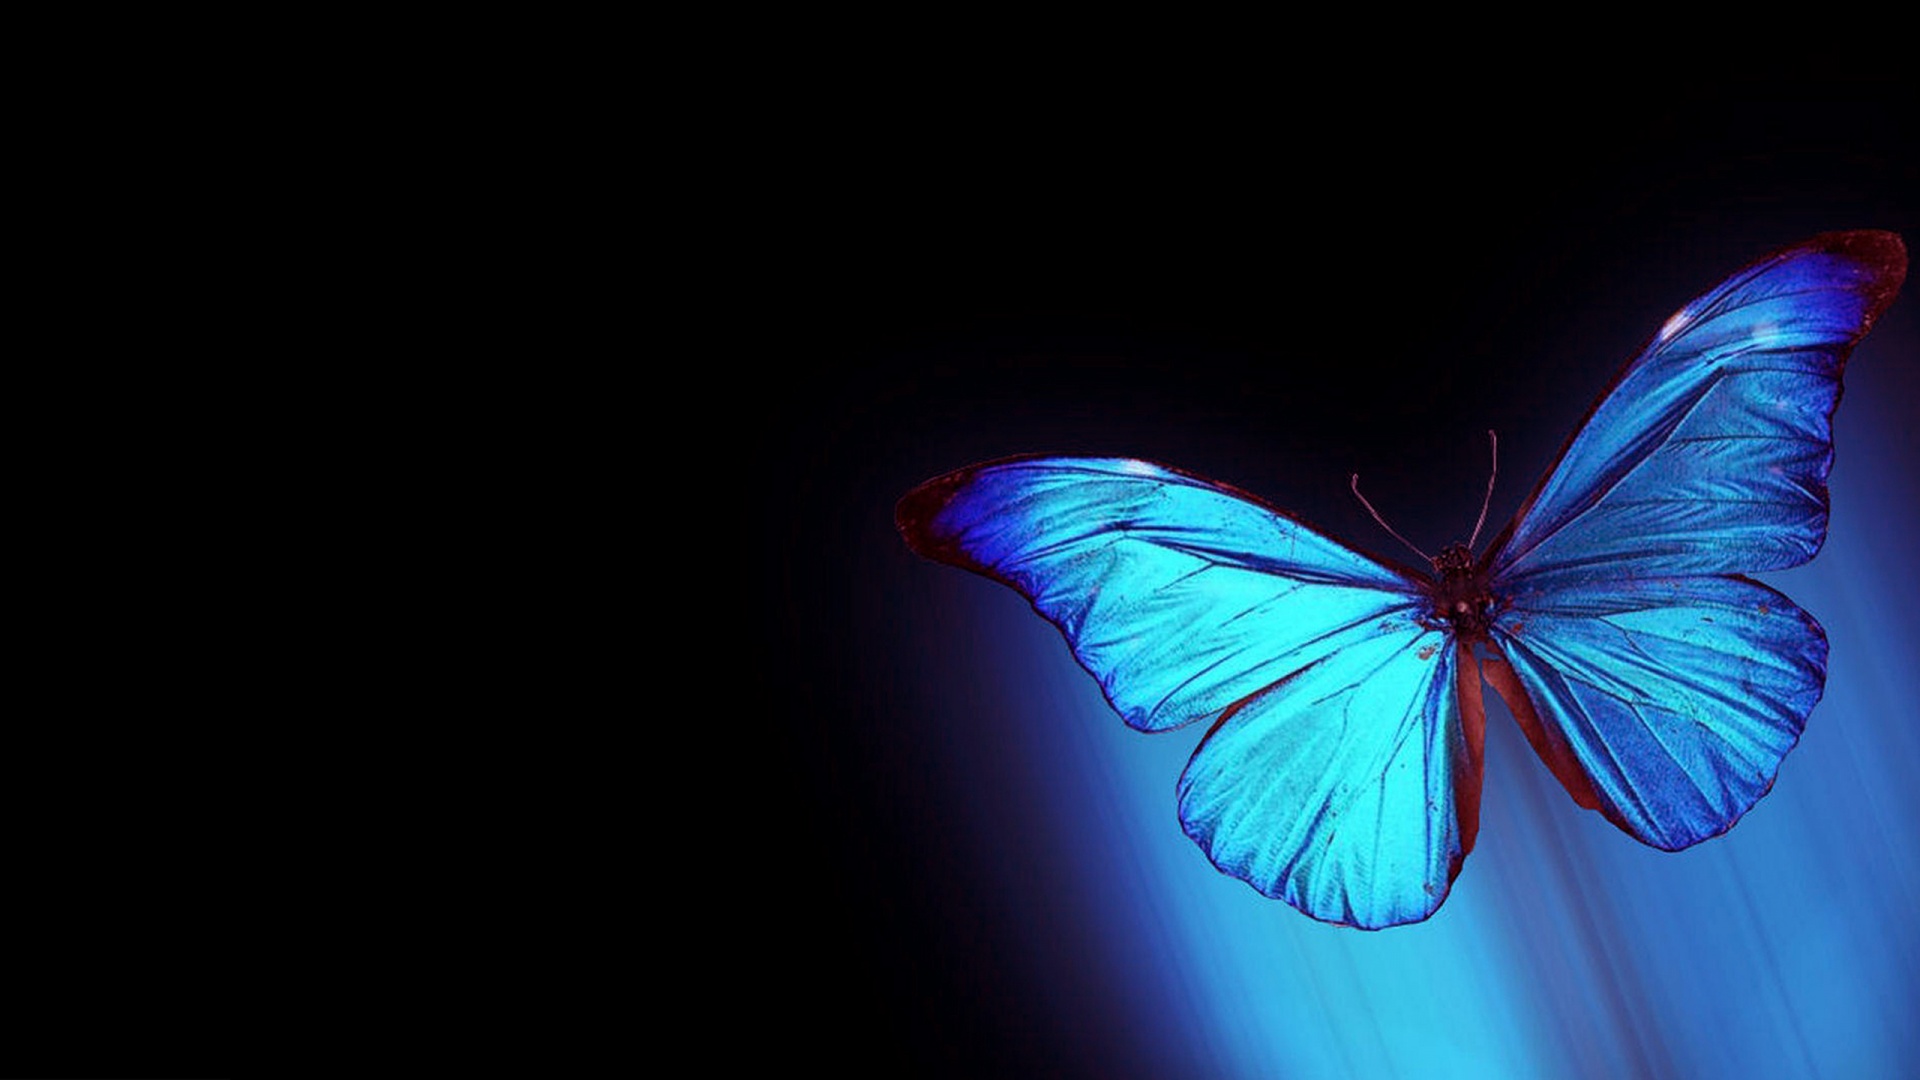 Abstract Butterfly Wallpaper For Laptop Unique HD